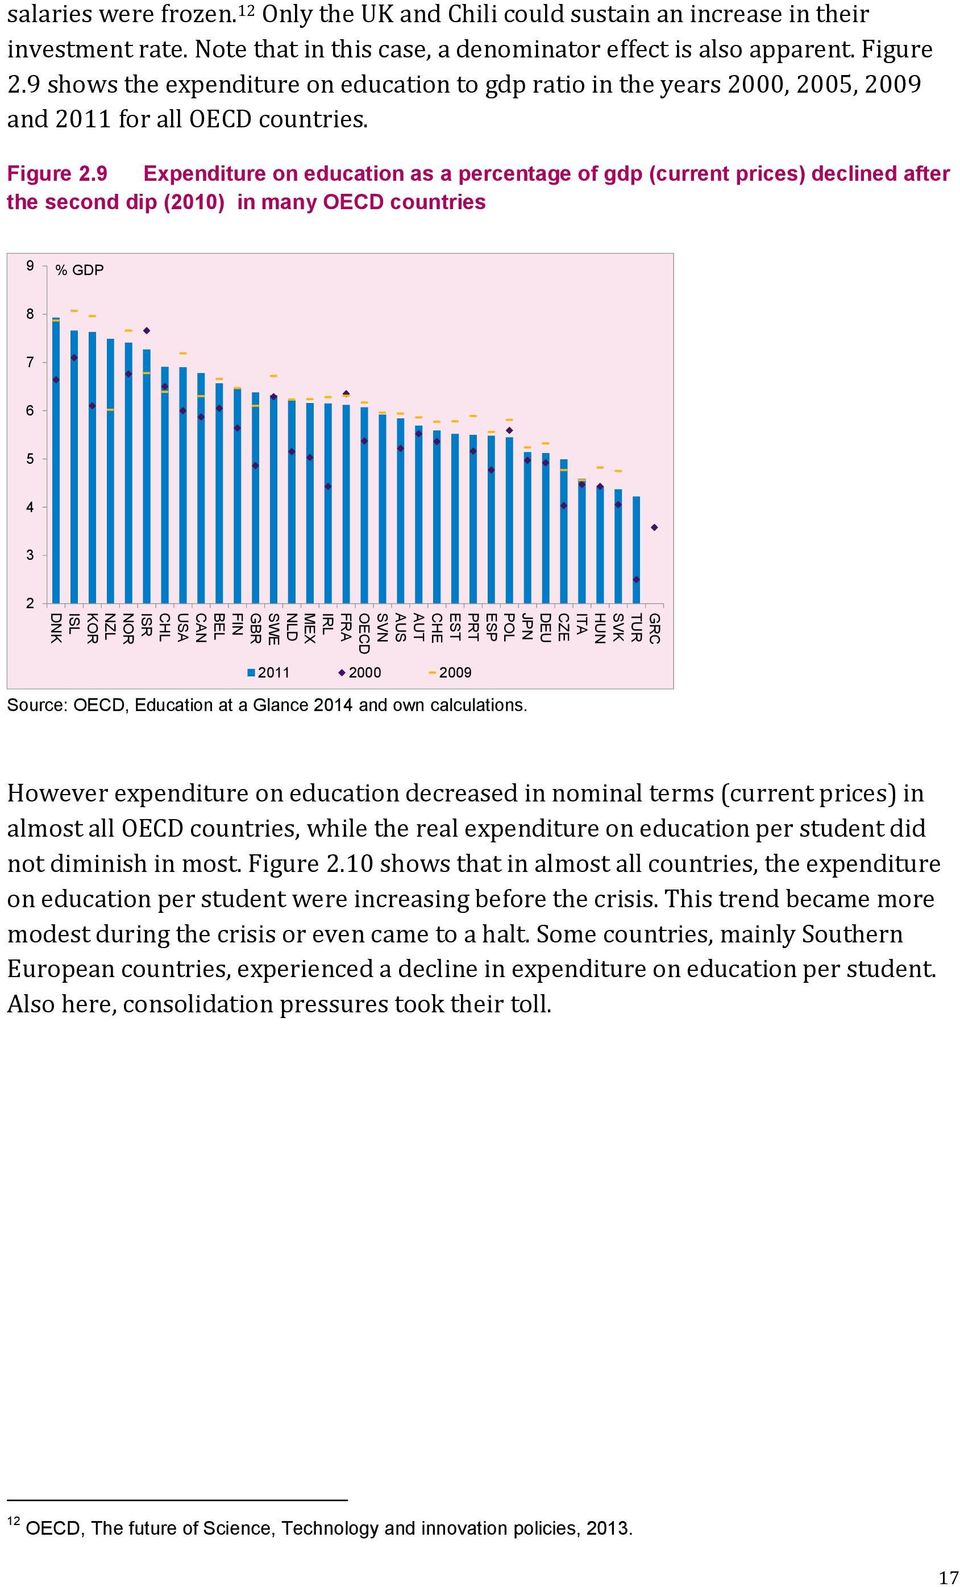 9 Expenditure on education as a percentage of gdp (current prices) declined after the second dip (2010) in many OECD countries 9 % GDP 8 7 6 5 4 3 2 GRC TUR SVK HUN ITA CZE DEU JPN POL ESP PRT EST